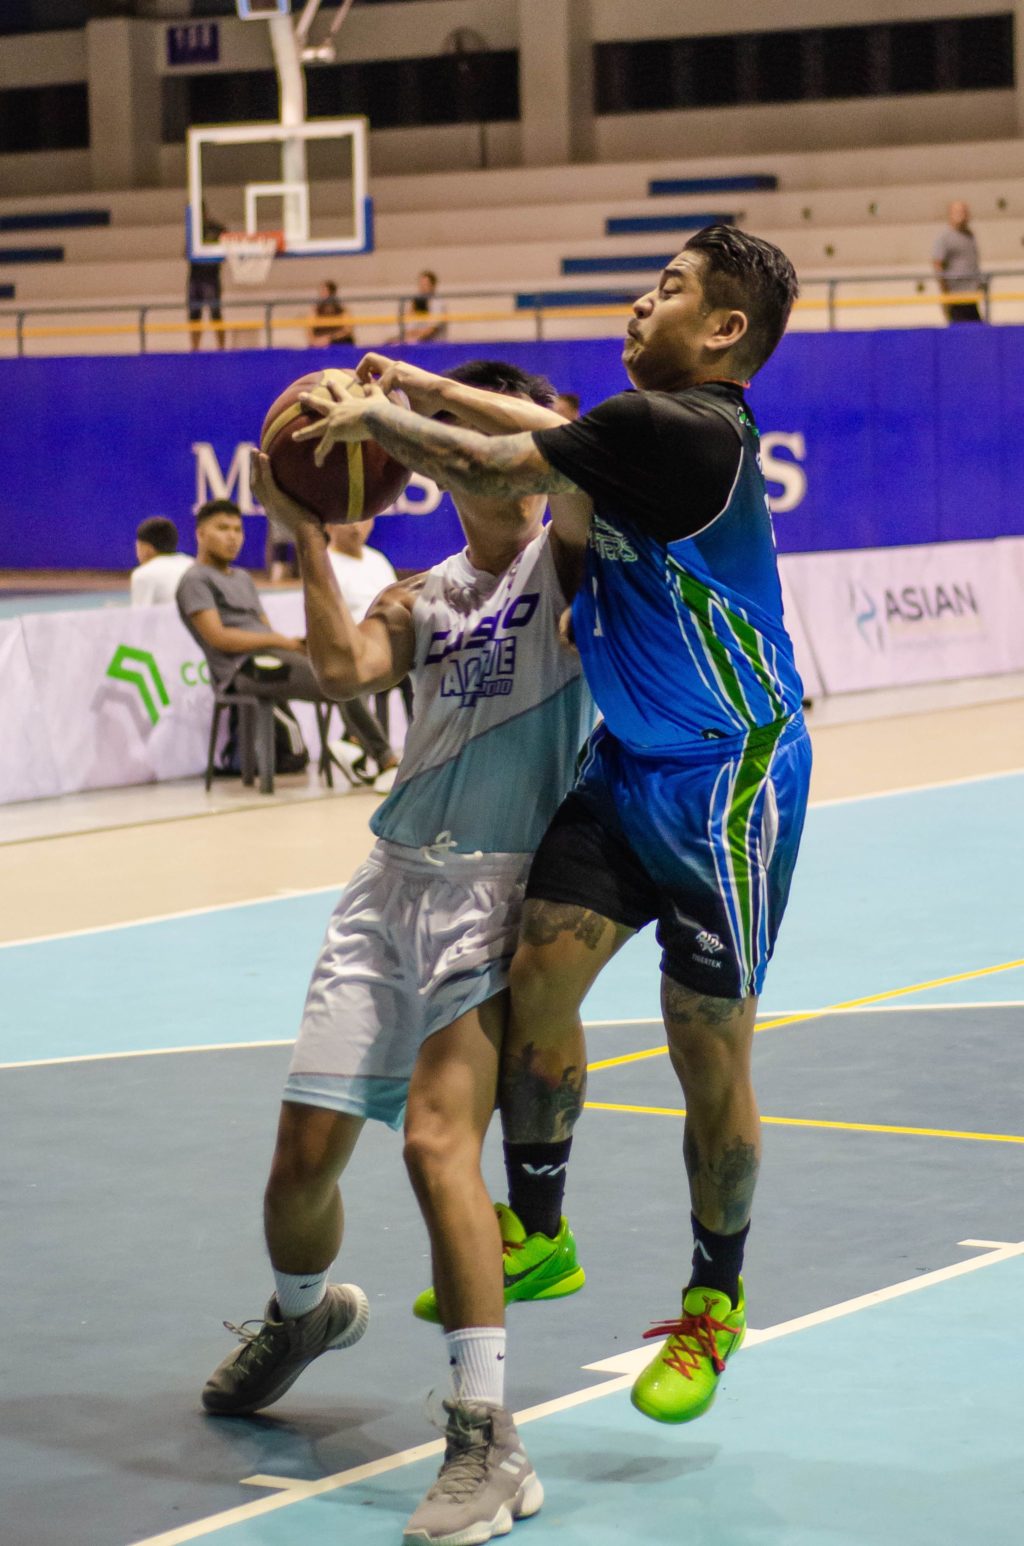 SHAABAA: Cebu Landmasters sweeps elim round, moves to Division B’s playoffs. IN PHOTO IS Batch 2003's Carlo Cecil Alerta (in blue jersey) as he battles for a rebound against a player from Batch 2010 during their SHAABAA Season 25 game on September 28, 2022. | Photo from SHAABAA